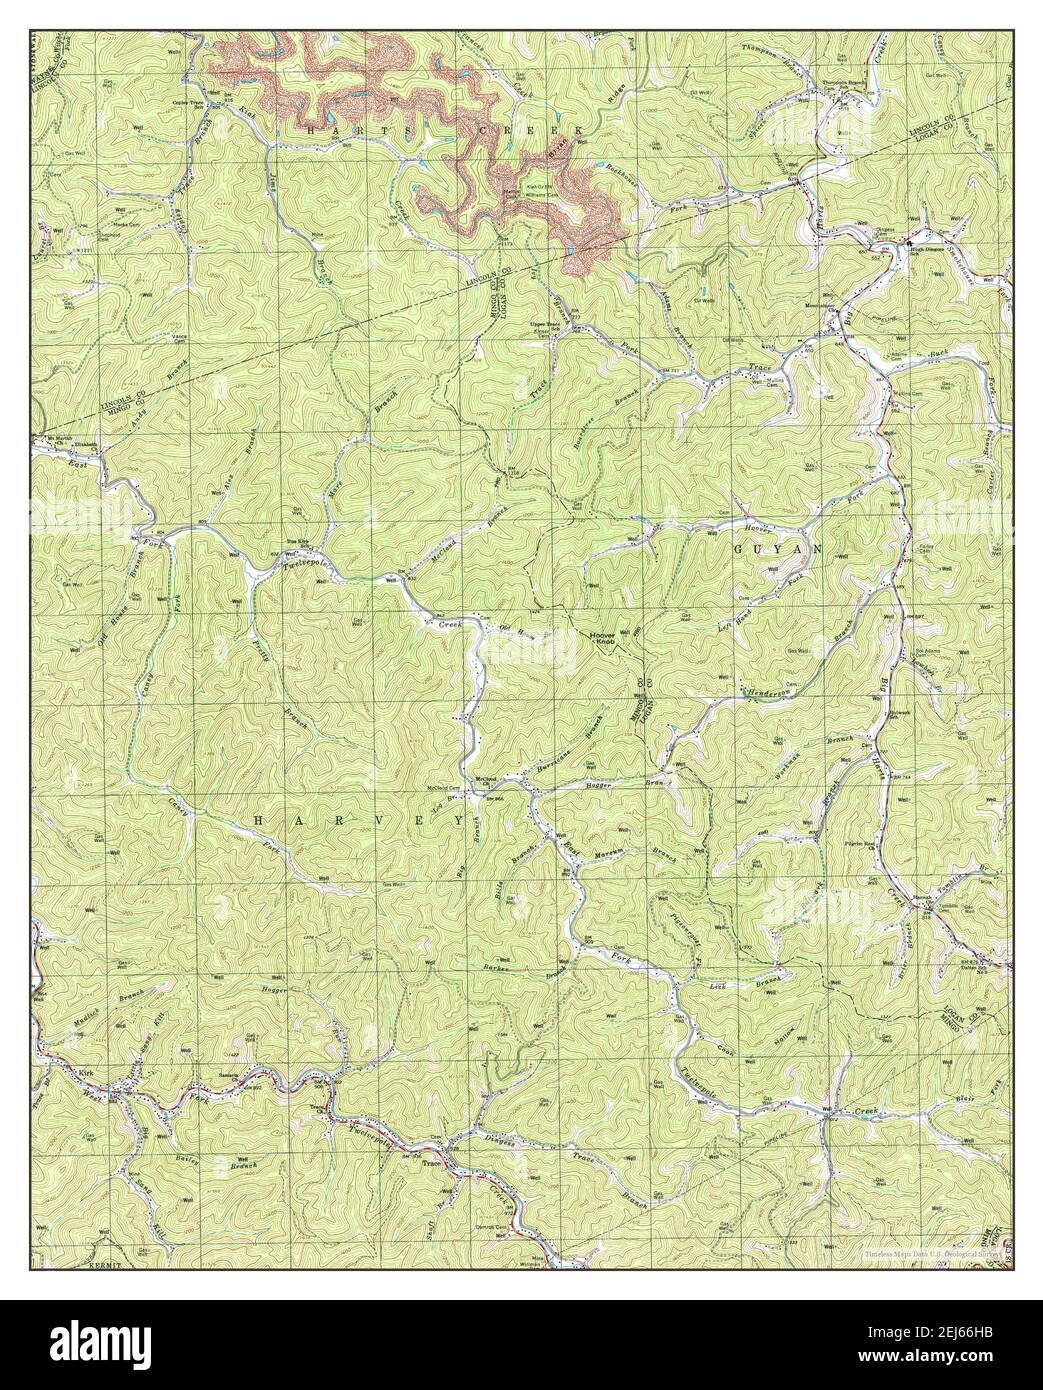 Trace, West Virginia, map 1997, 1:24000, United States of America by Timeless Maps, data U.S. Geological Survey Stock Photo